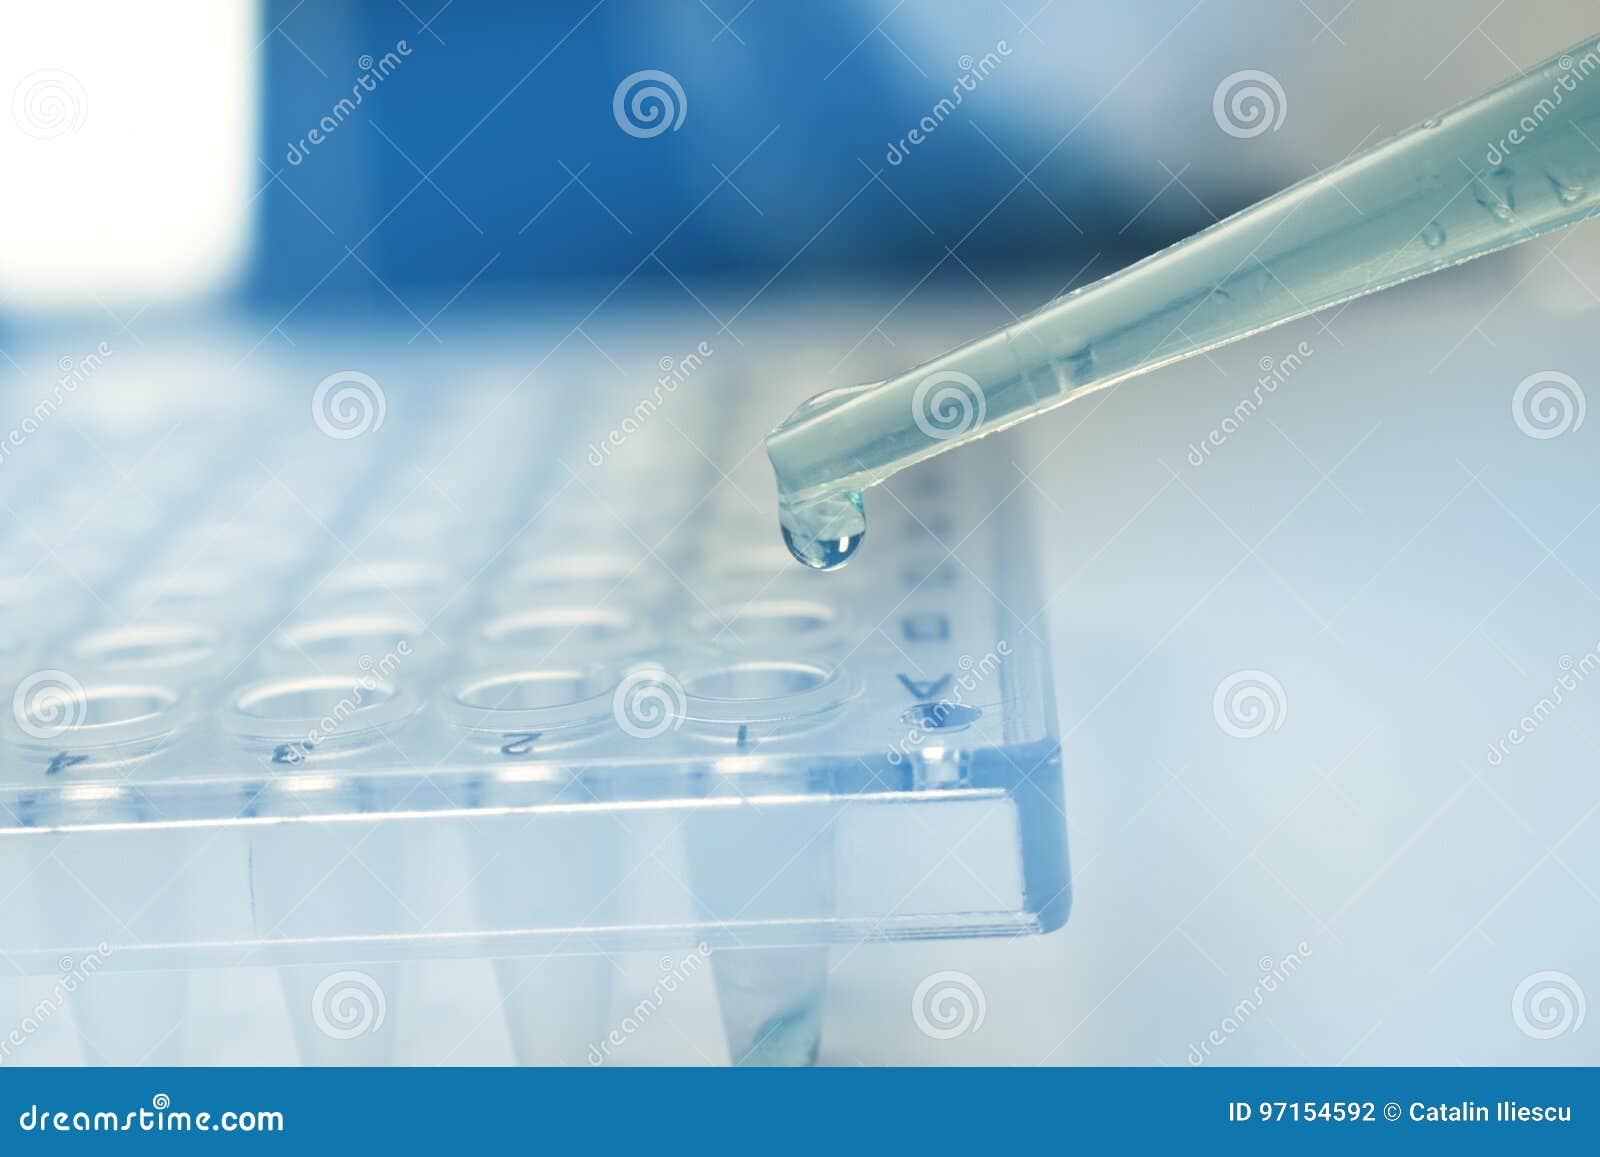 stem cell research pipette